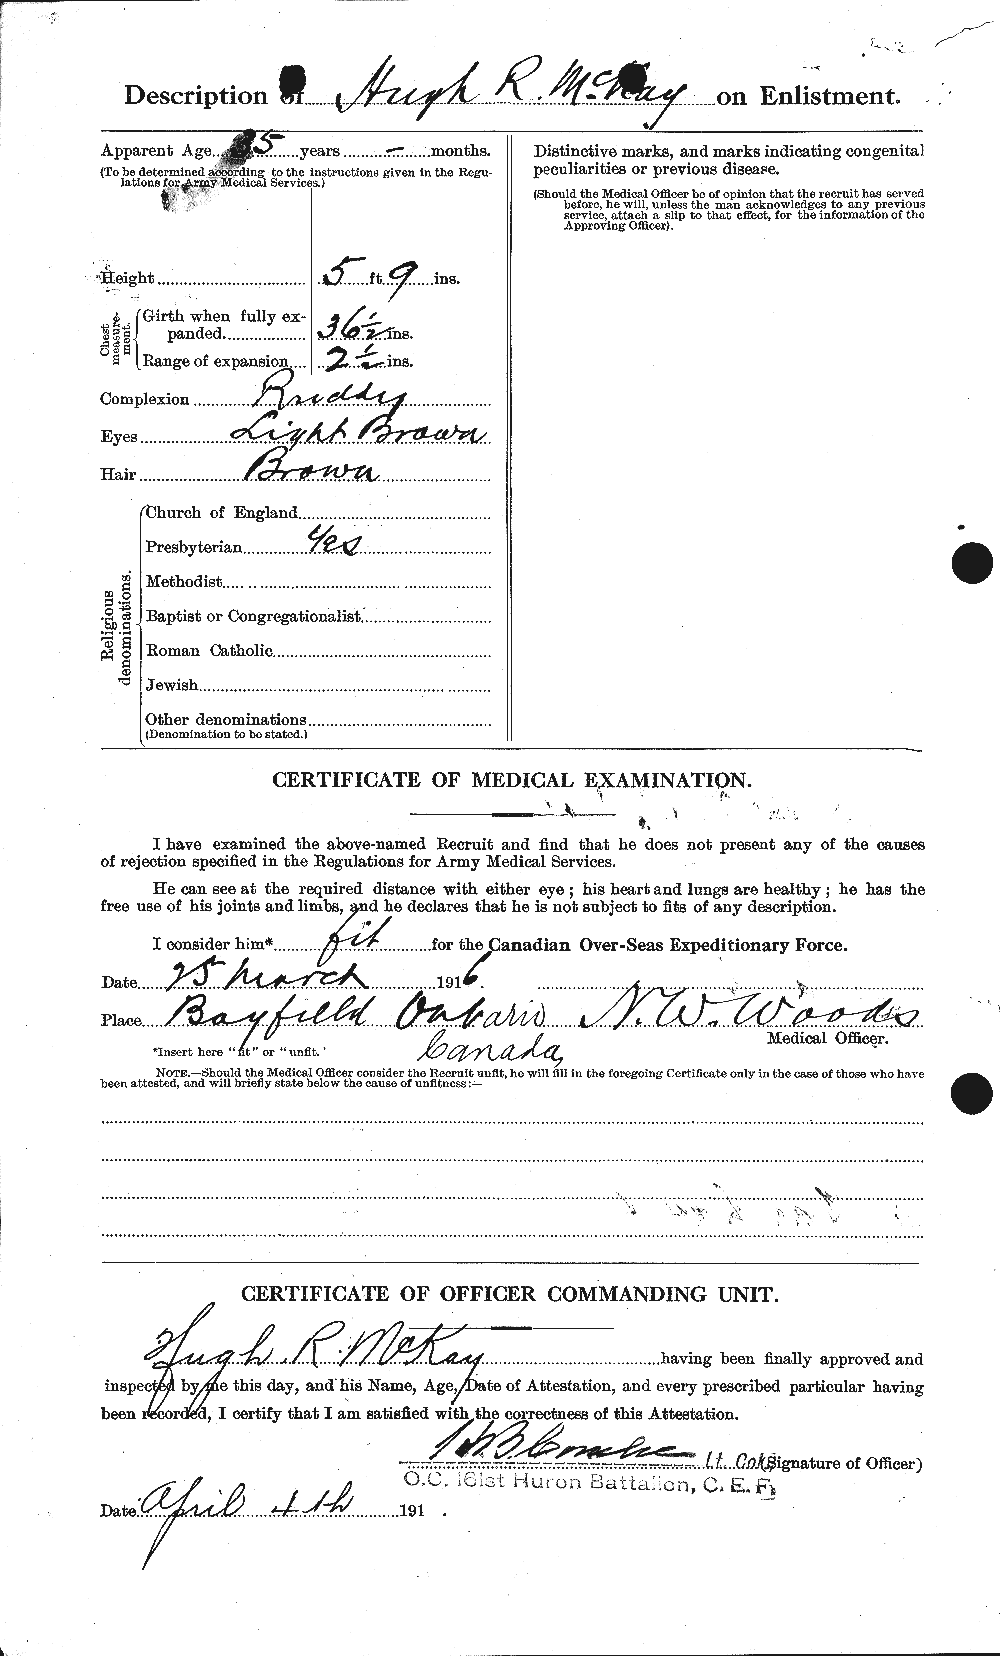 Personnel Records of the First World War - CEF 534782b